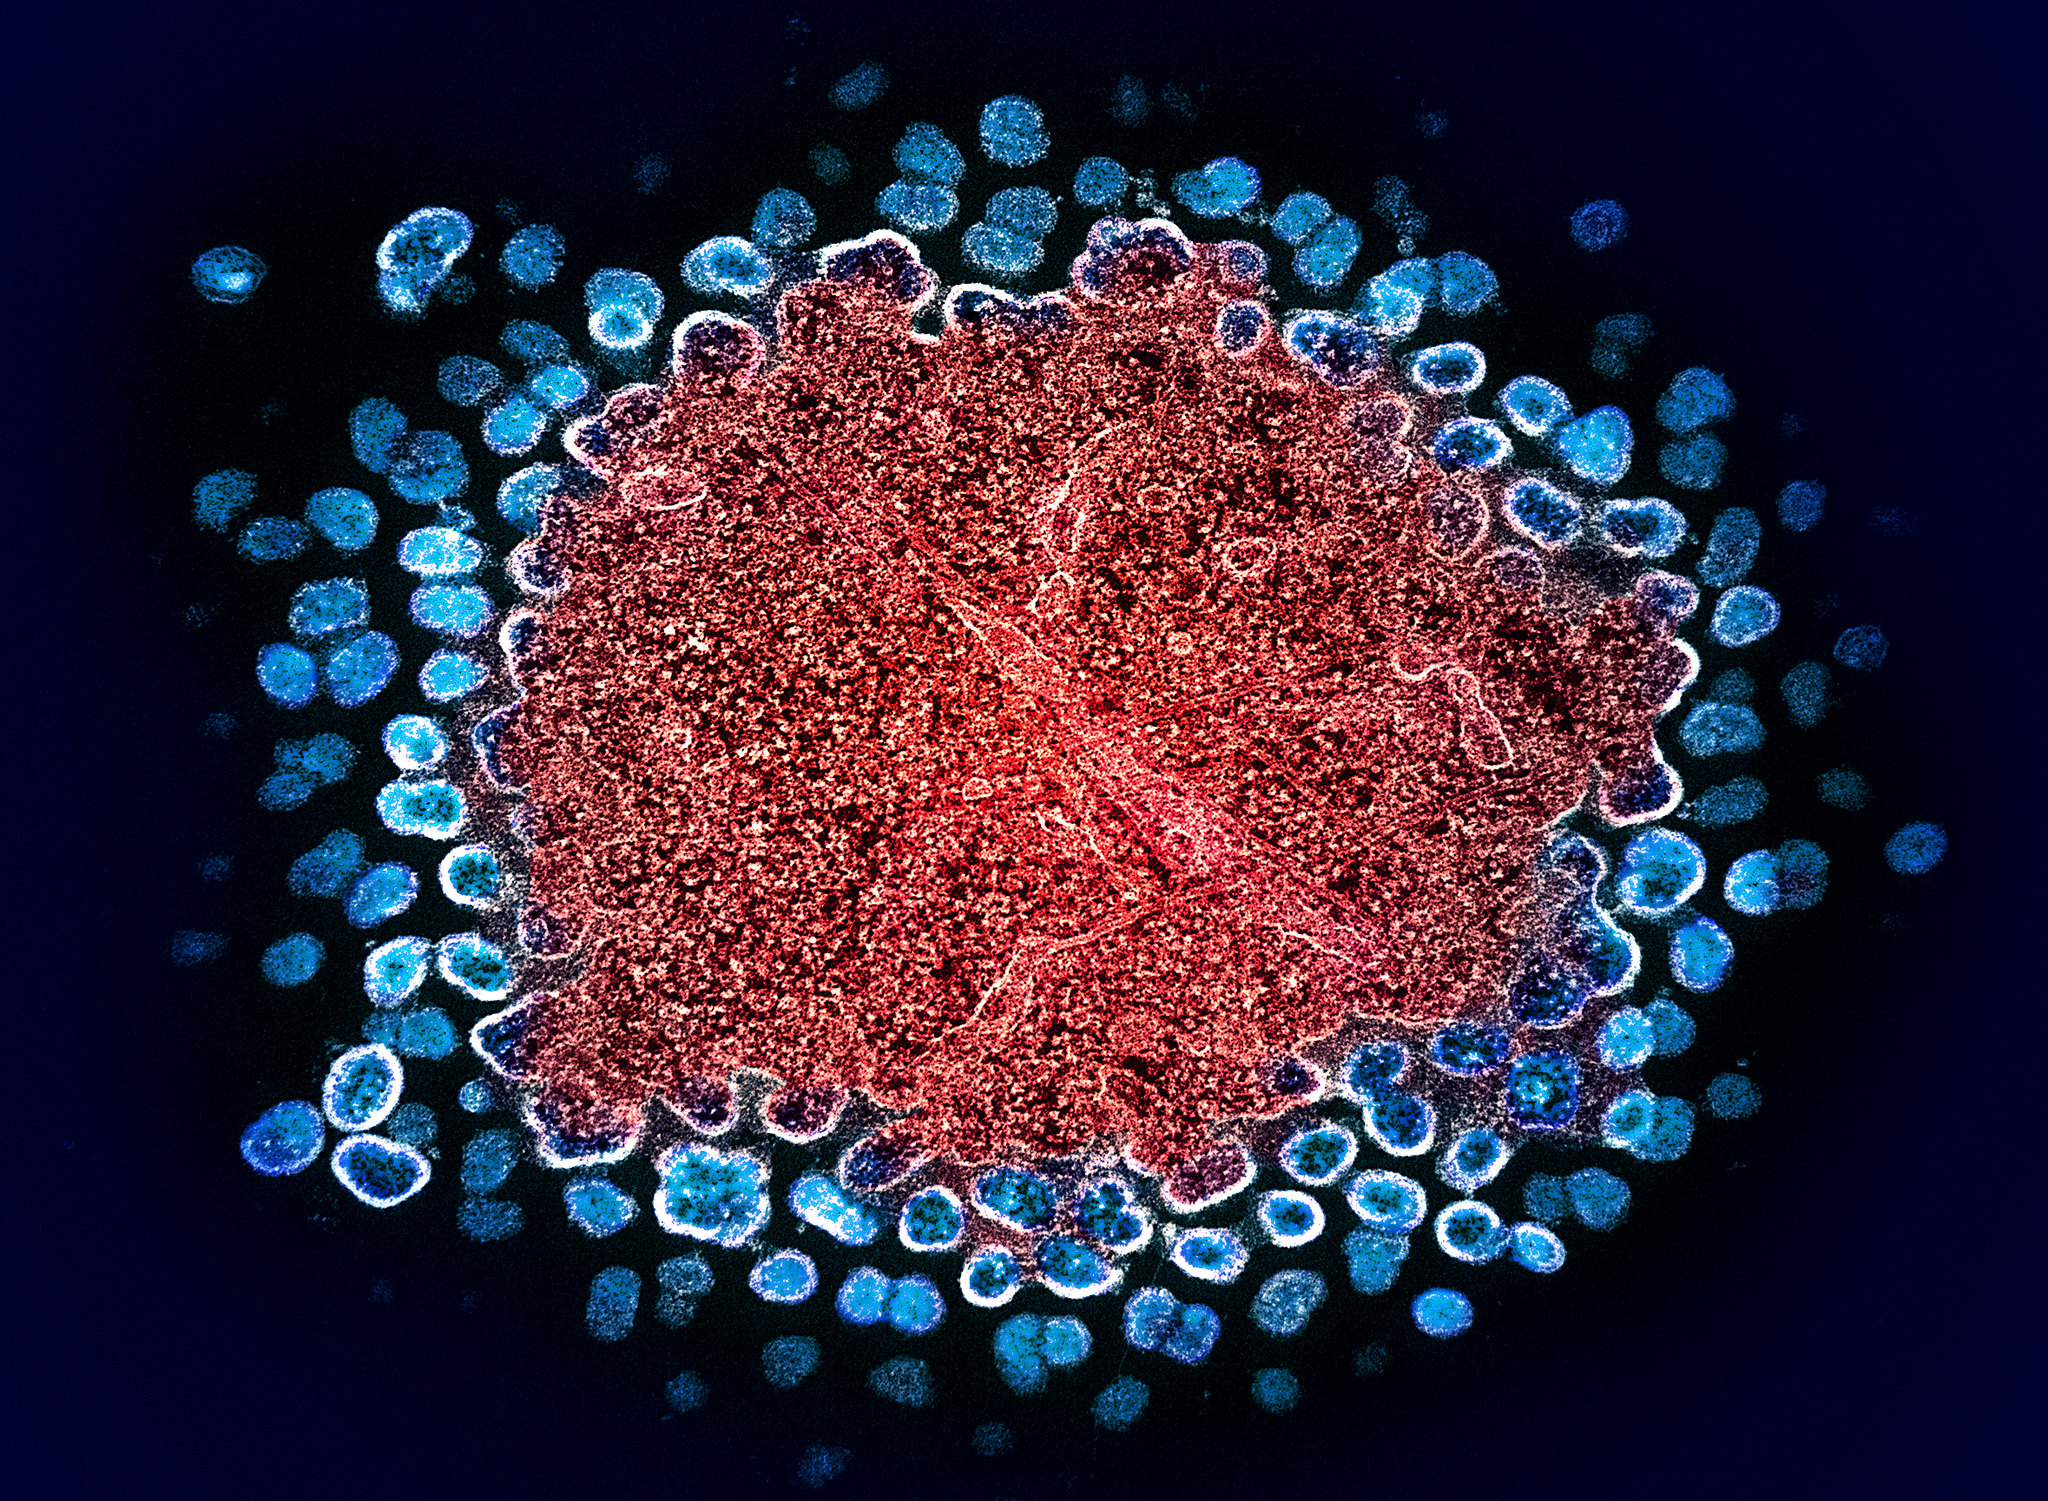 Numerous HIV particles surrounding a cell, with some emerging from it